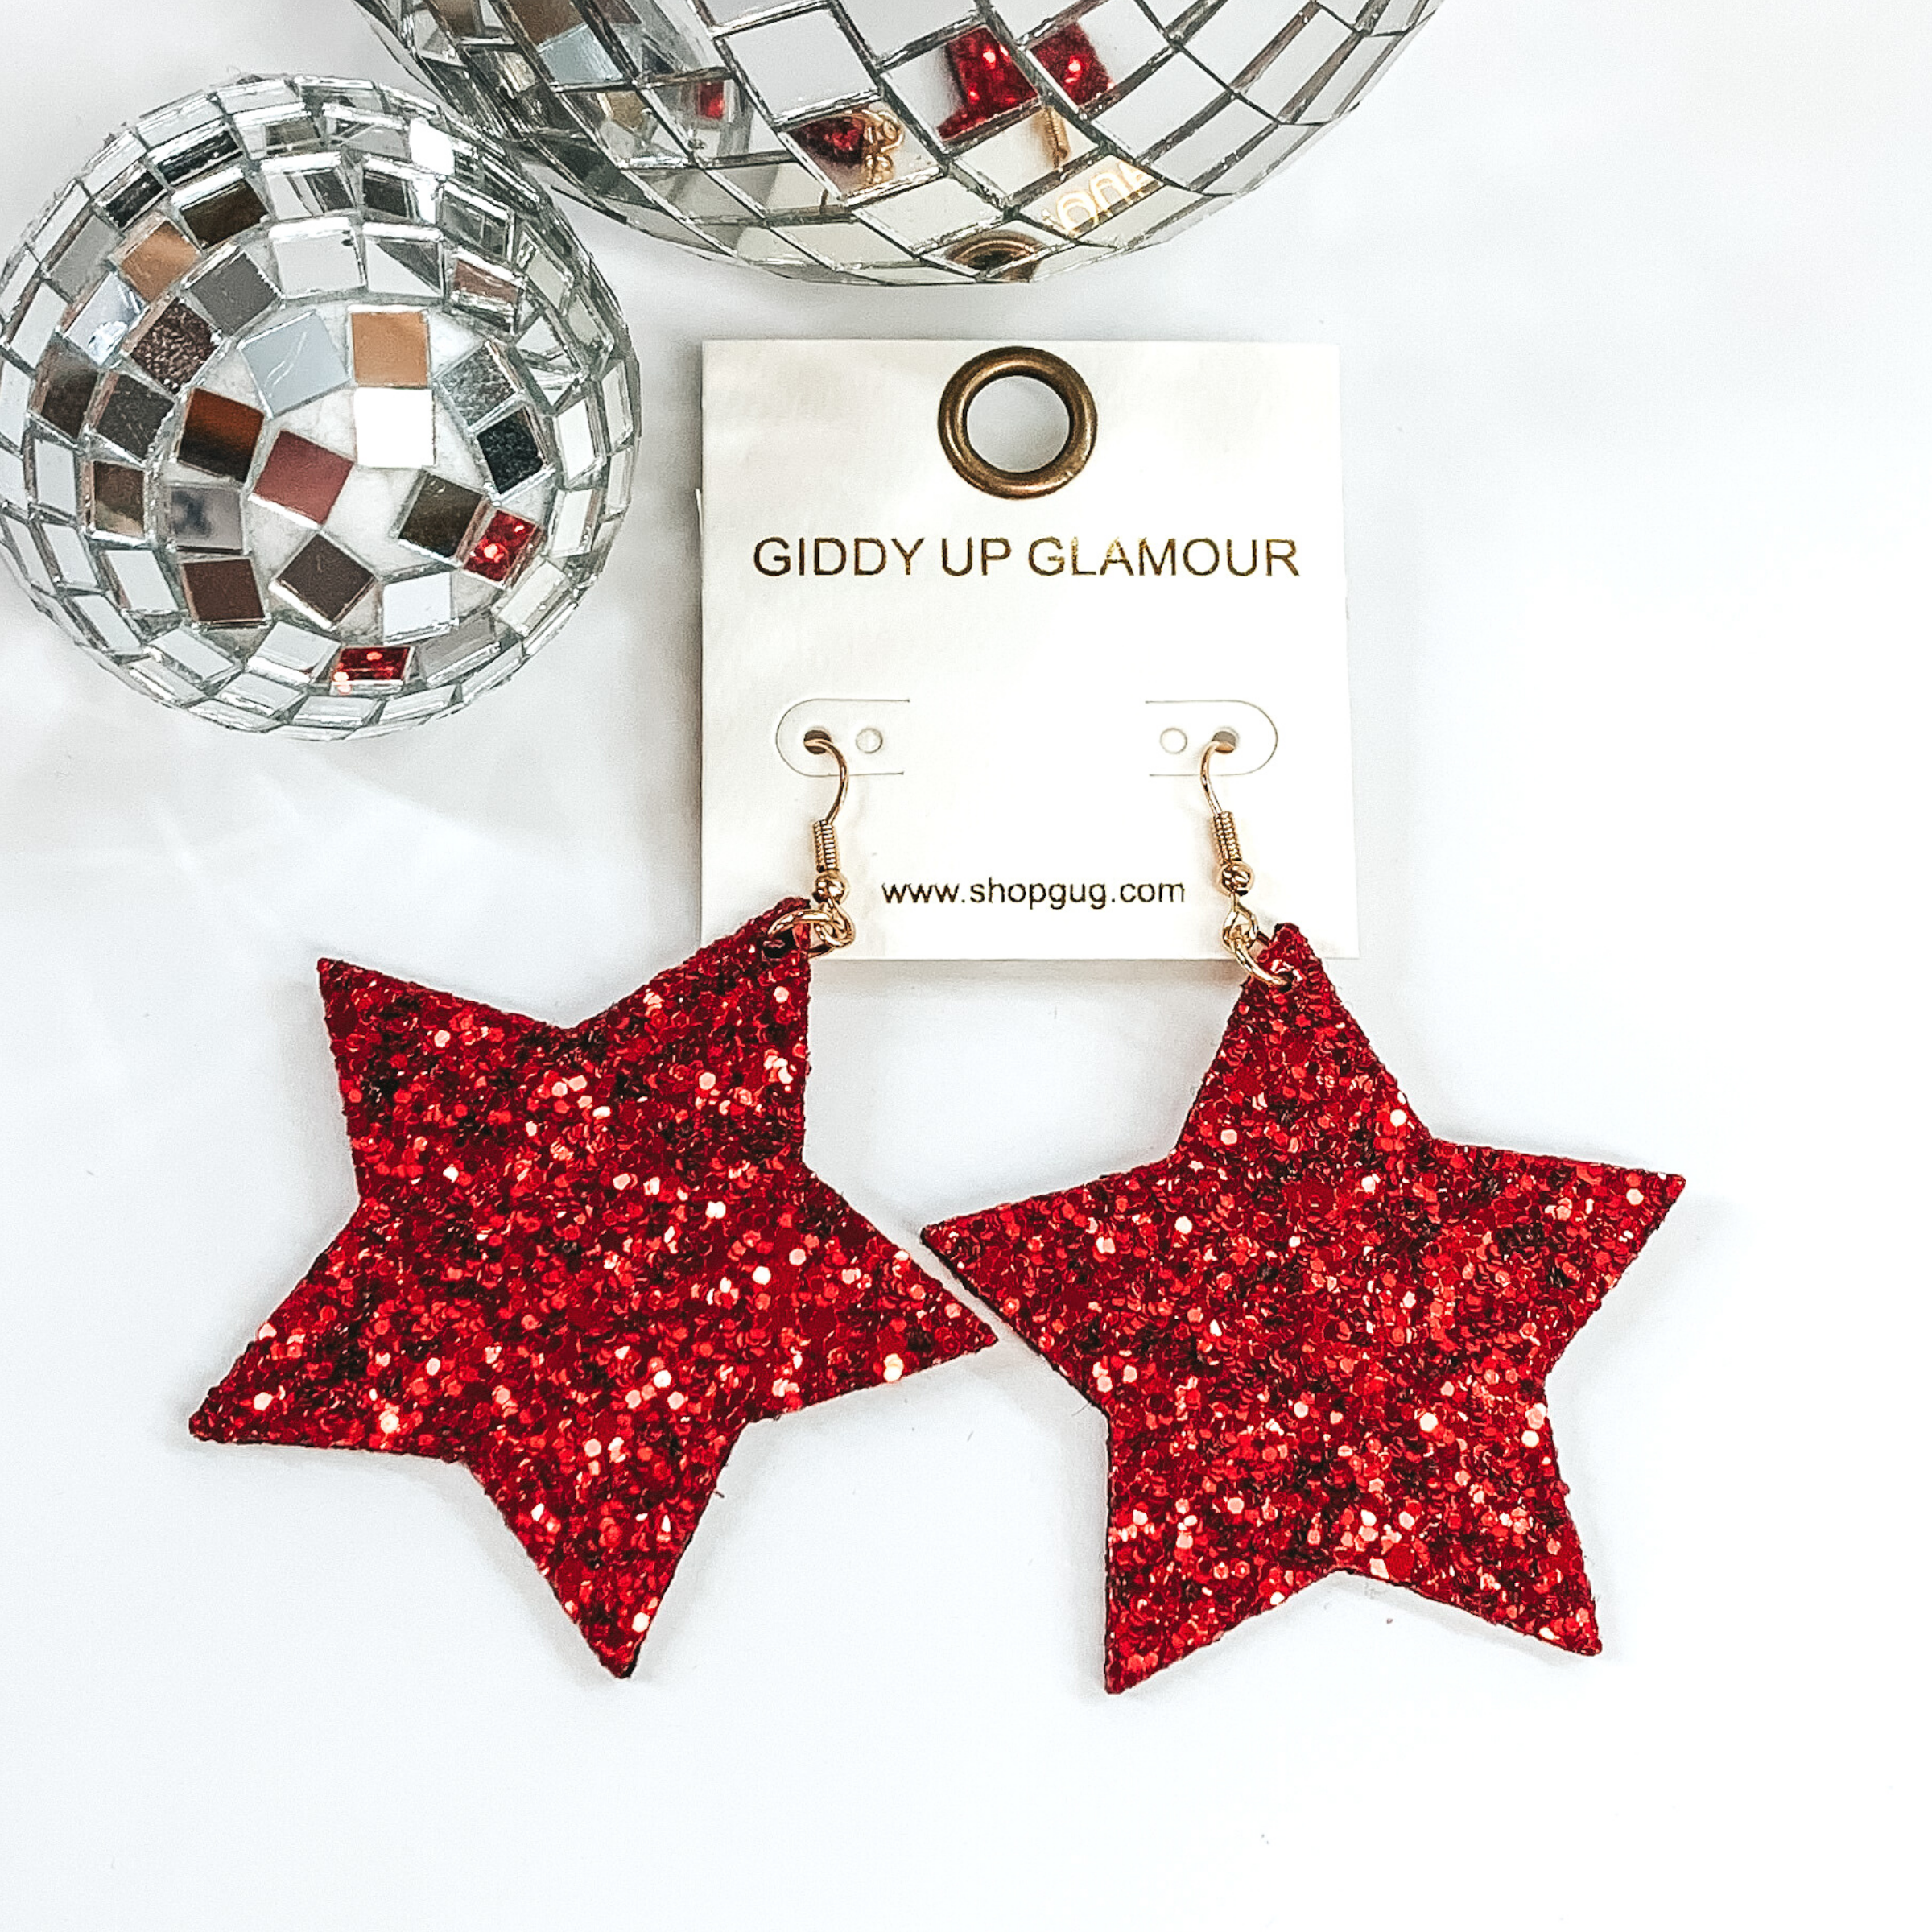 Glitter star dangle earrings in red with a gold earrings hook. These earrings are pictured on a white background with a disco ball at the top of the picture.